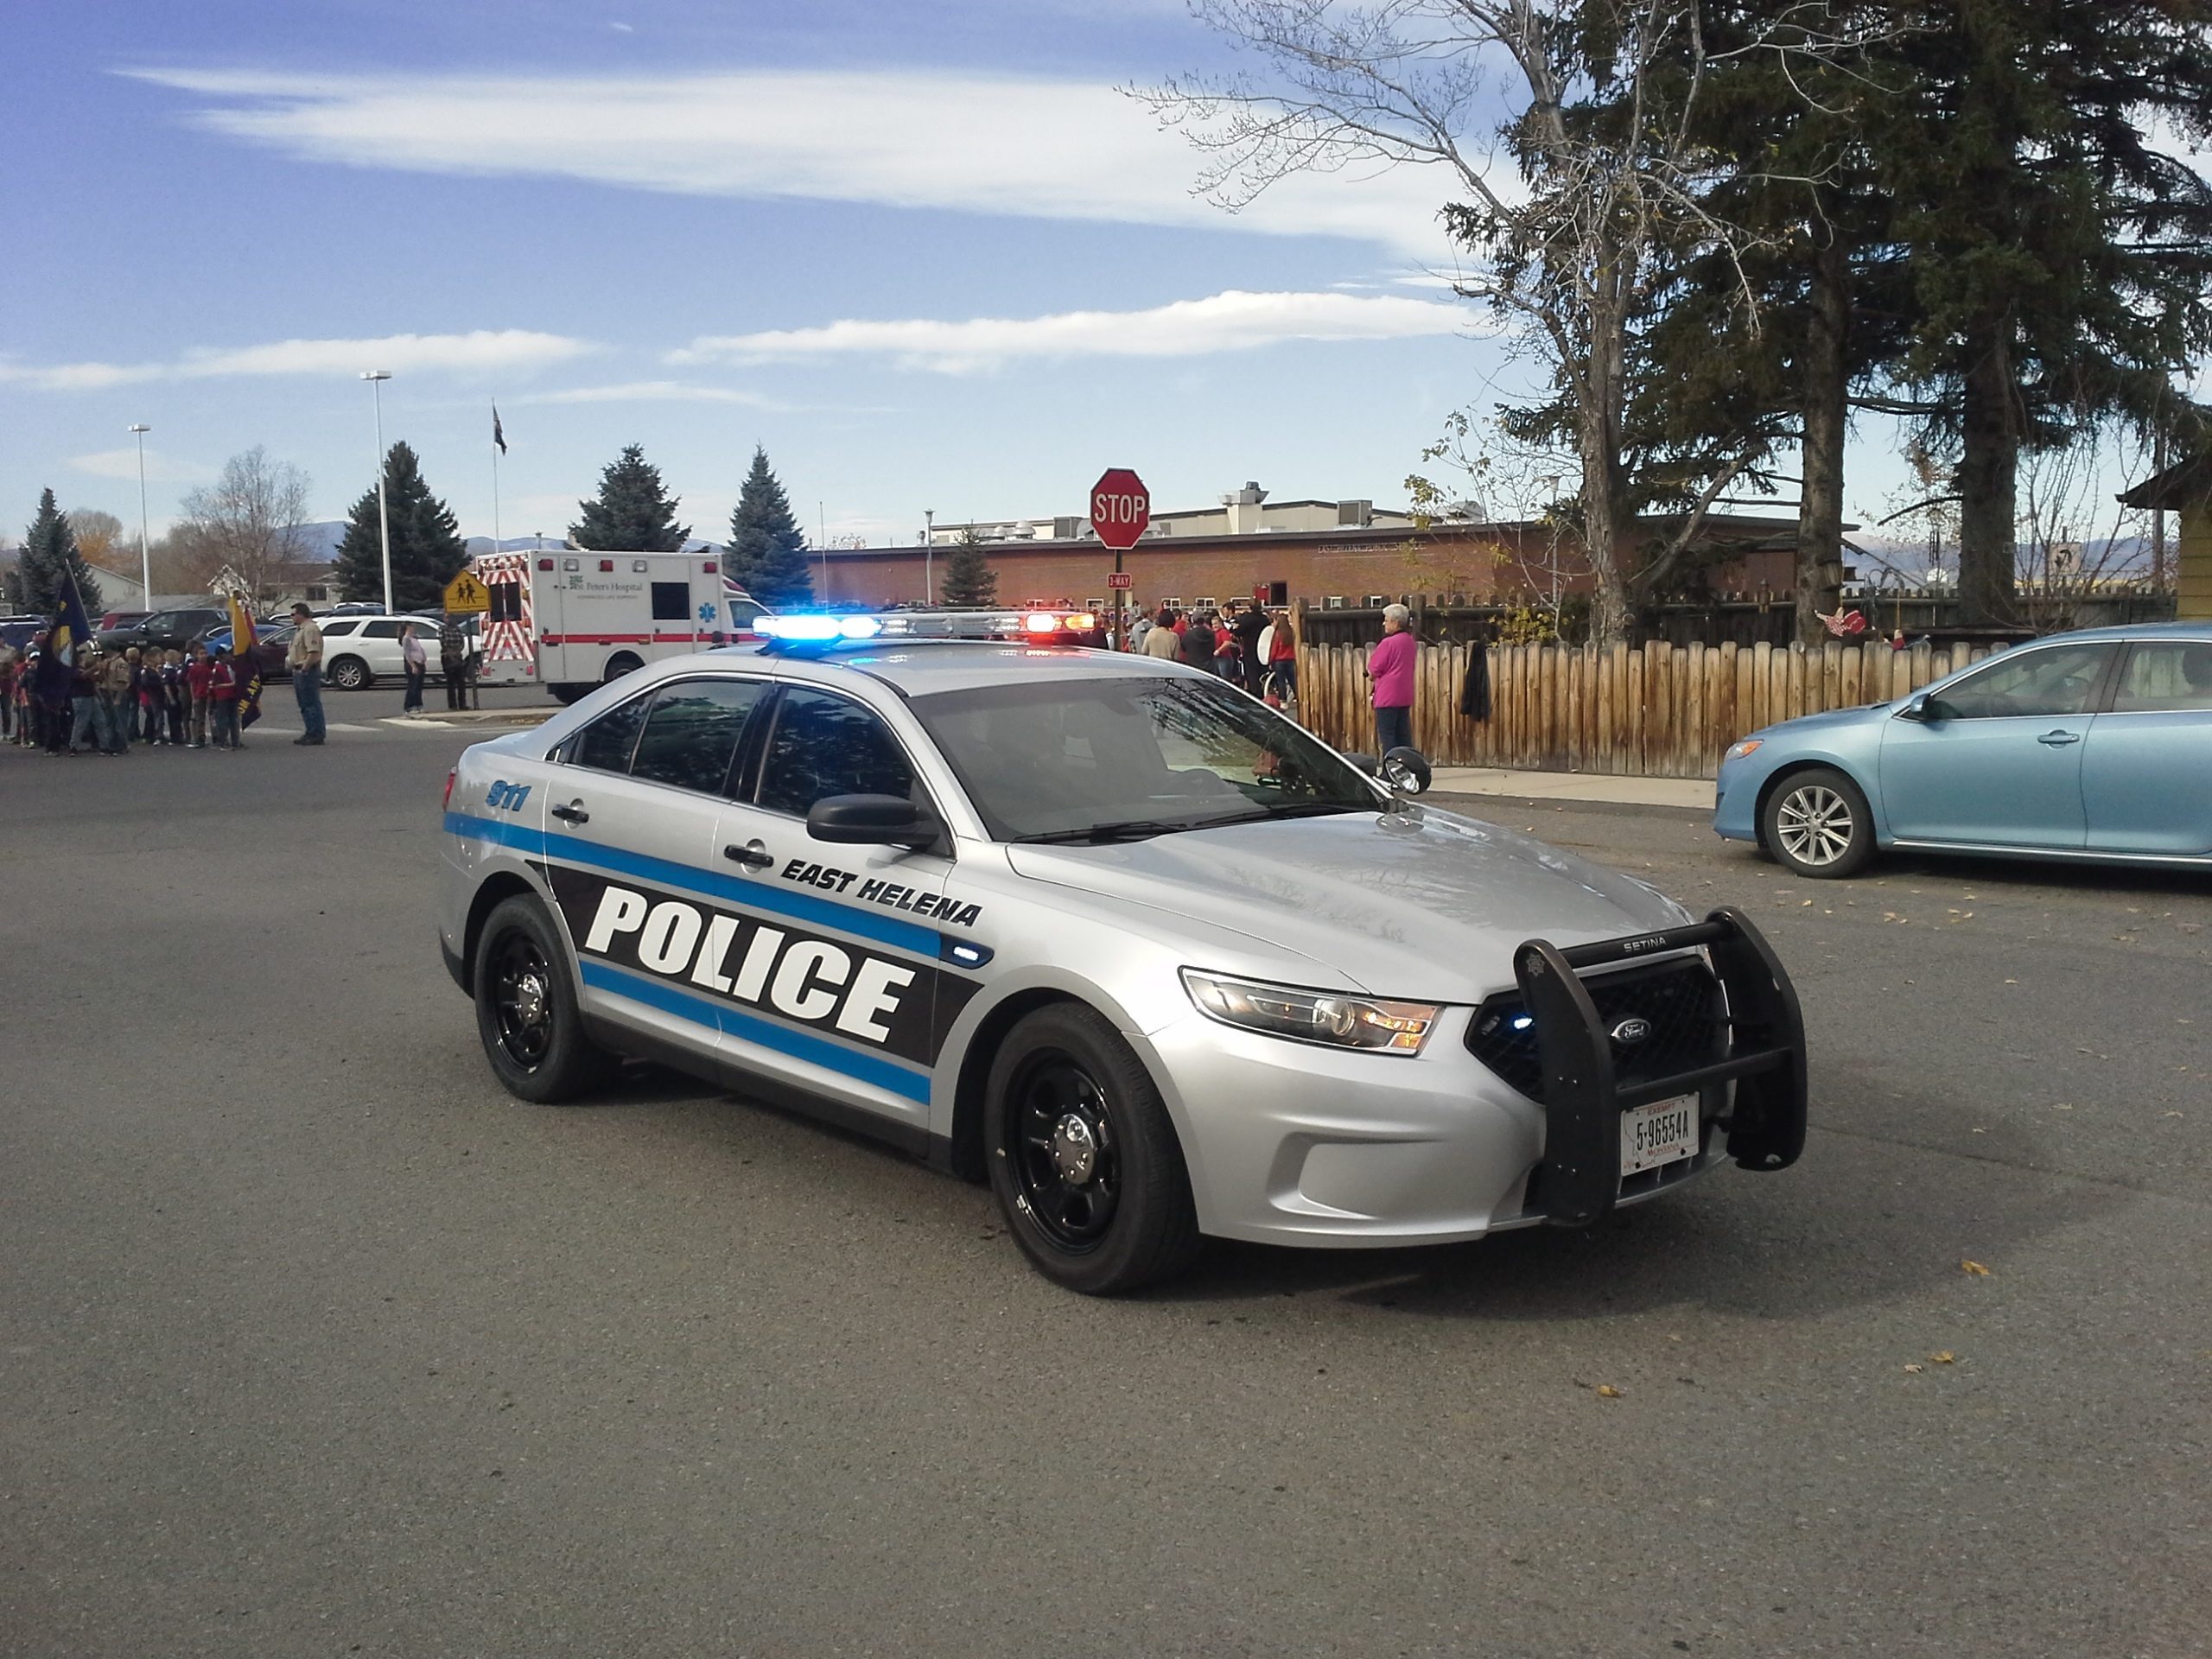 East Helena Police Cruiser leading the Red Ribbon Parade